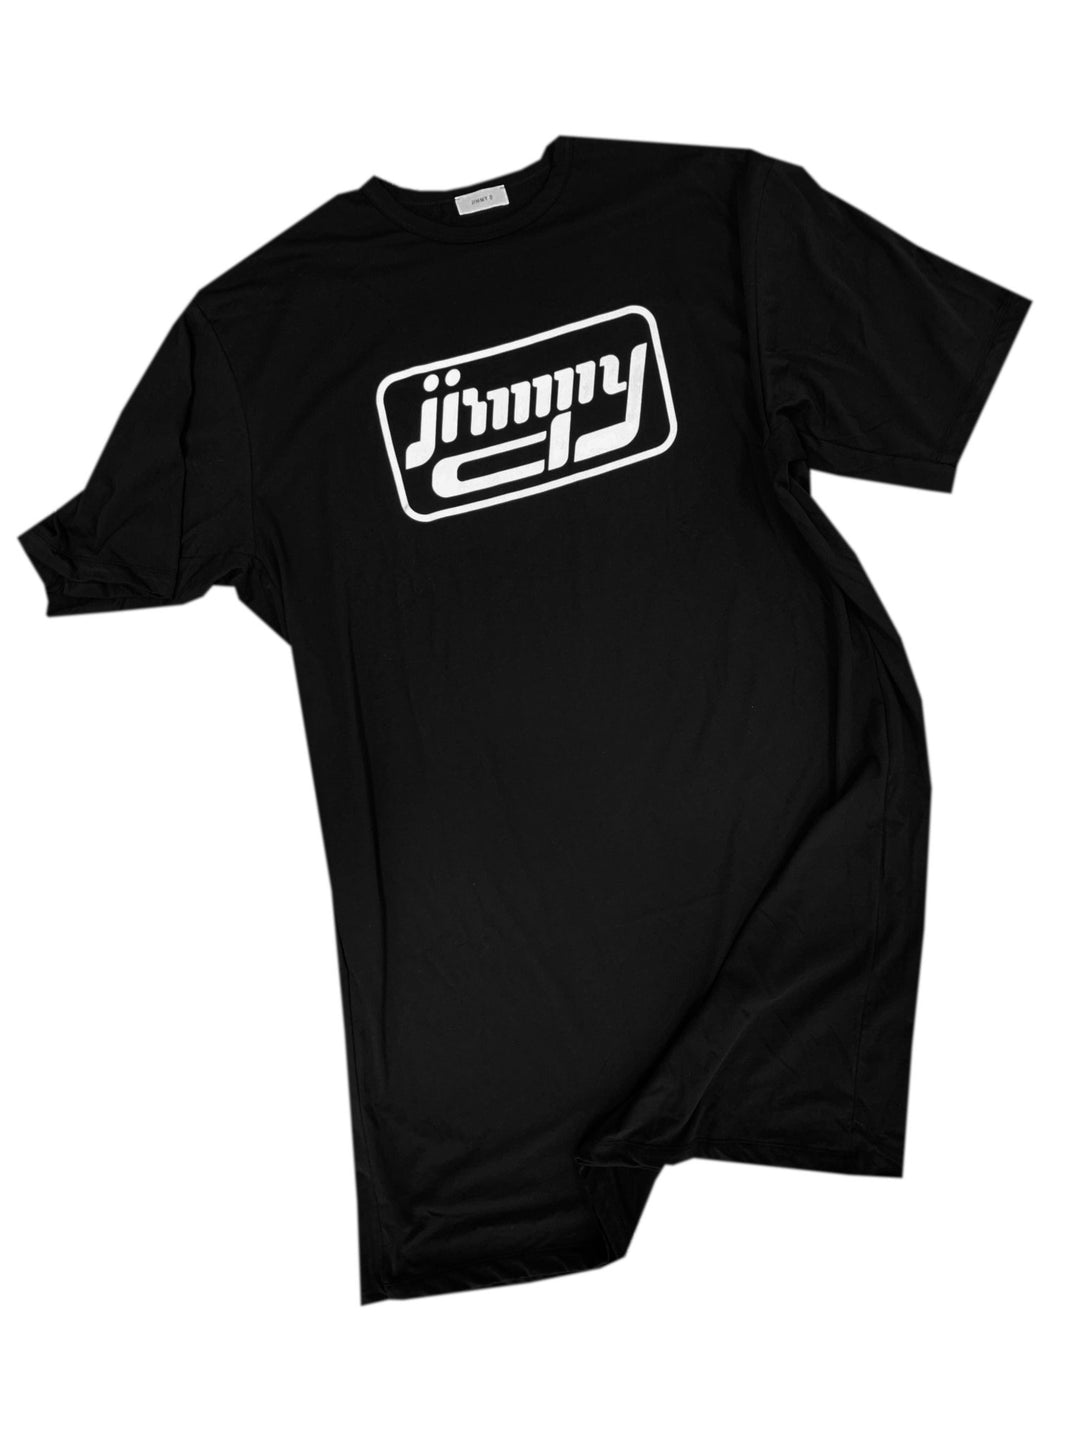 Space & Time - New Jimmy Logo - Chillis & More NZ